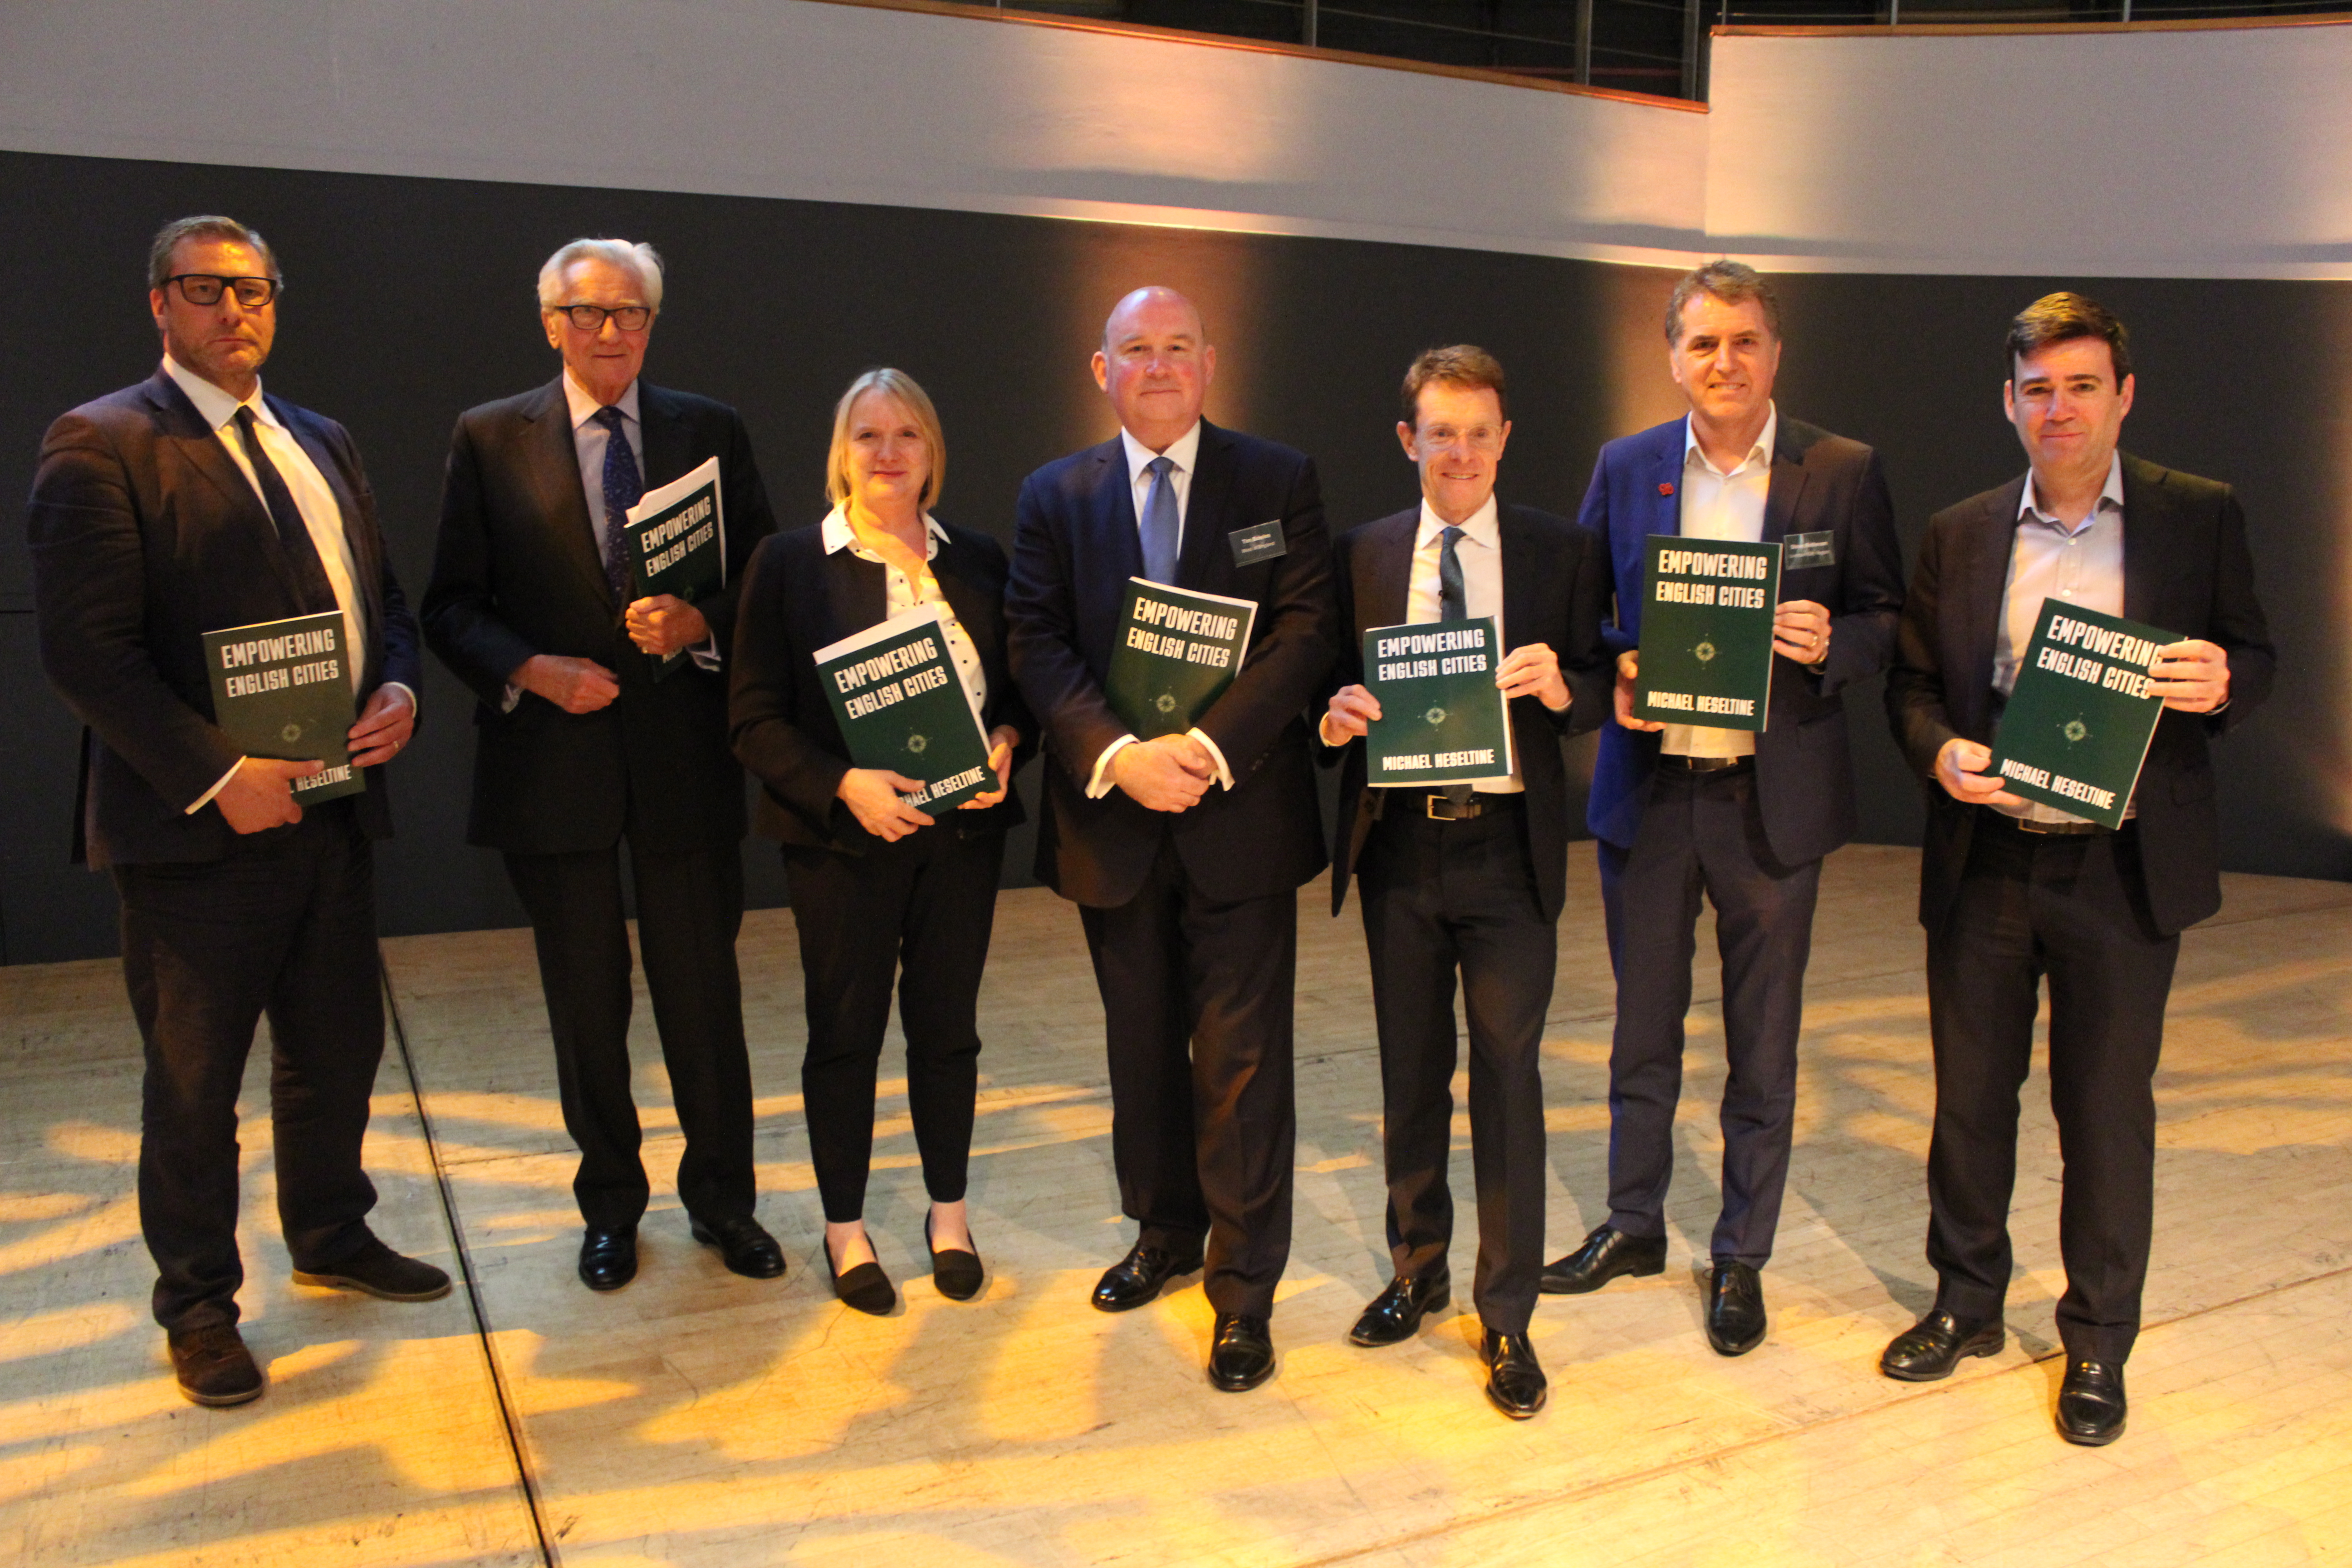 Launch of the Empowering English Cities report.  From left: Mayor of Cambridgeshire and Peterborough James Palmer, Lord Heseltine, Joanne McCartney Deputy Mayor of London, Tim Bowles Mayor of the West of England, Andy Street Mayor of the West Midlands, Steve Rotherham Mayor of Liverpool City Region and Andy Burnham Mayor of Greater Manchester